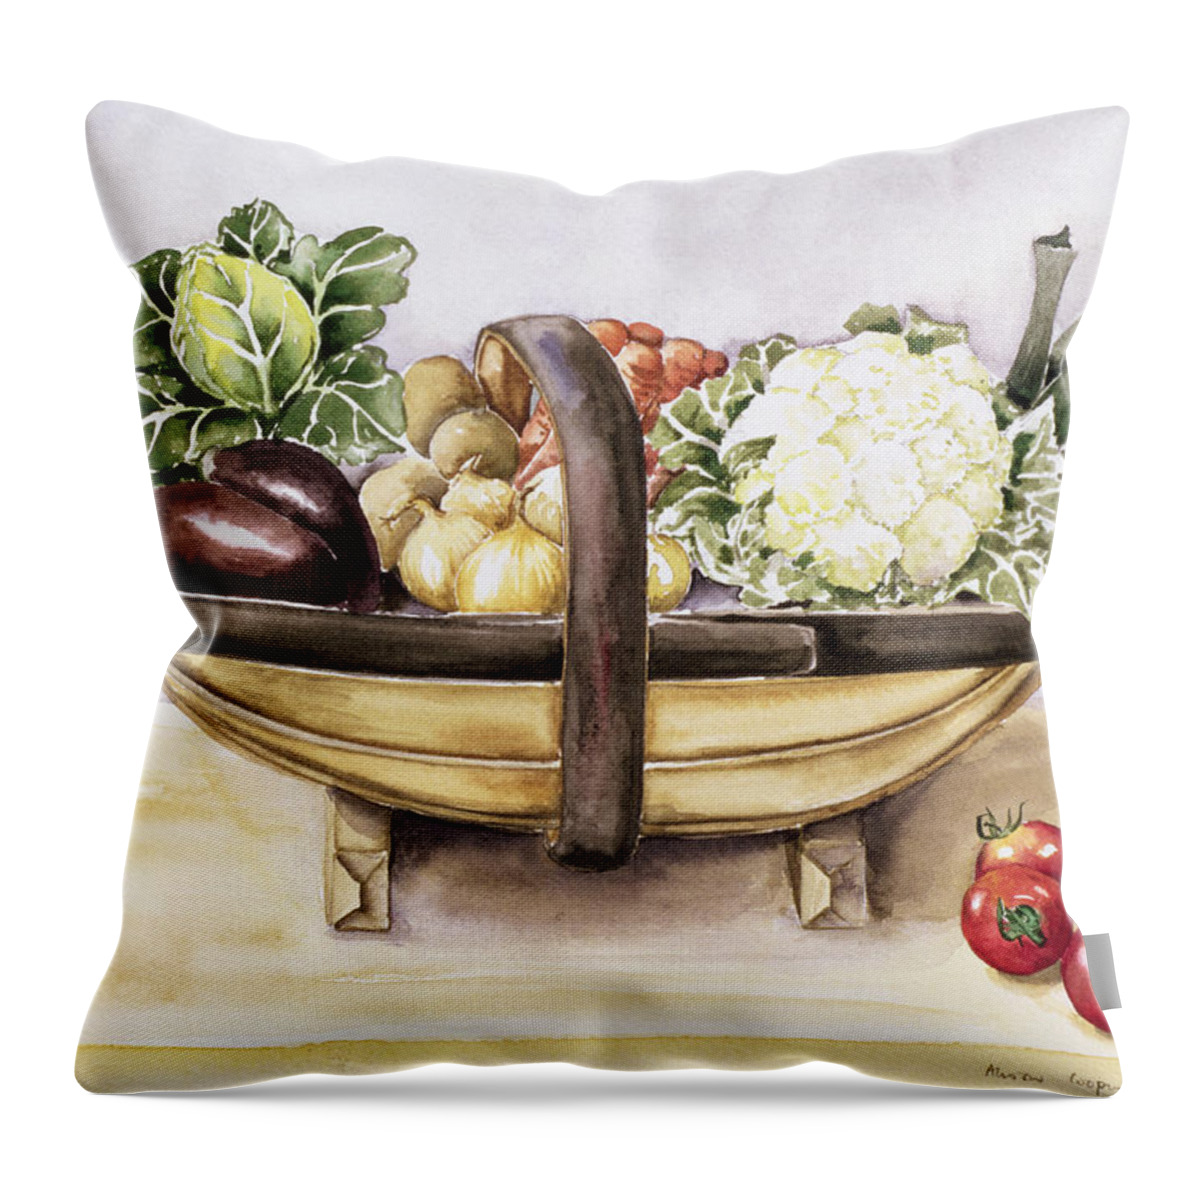 Still-life Throw Pillow featuring the painting Still life with a trug of vegetables by Alison Cooper